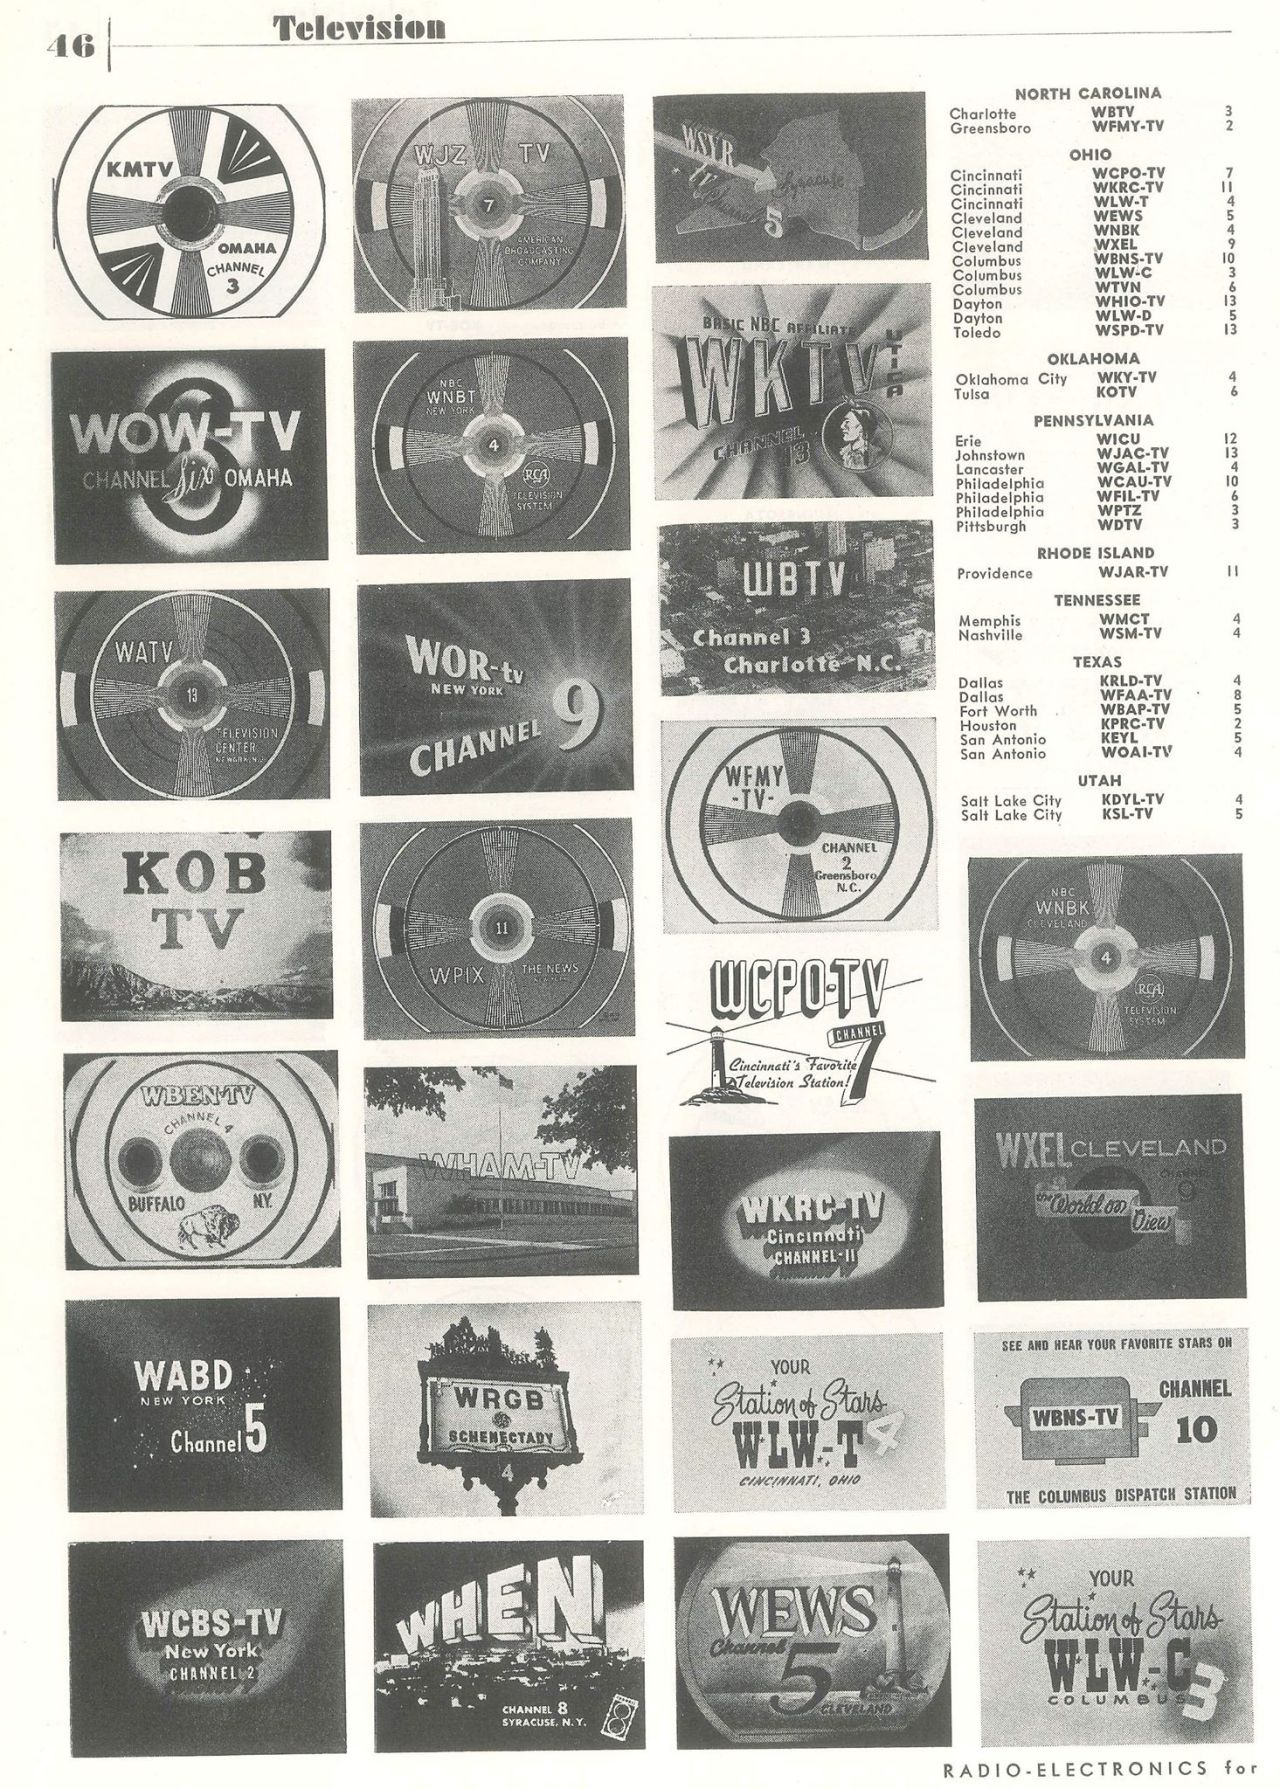 'TV Station List' - page 3 of 4 - published in Radio-Electronics - January 1951